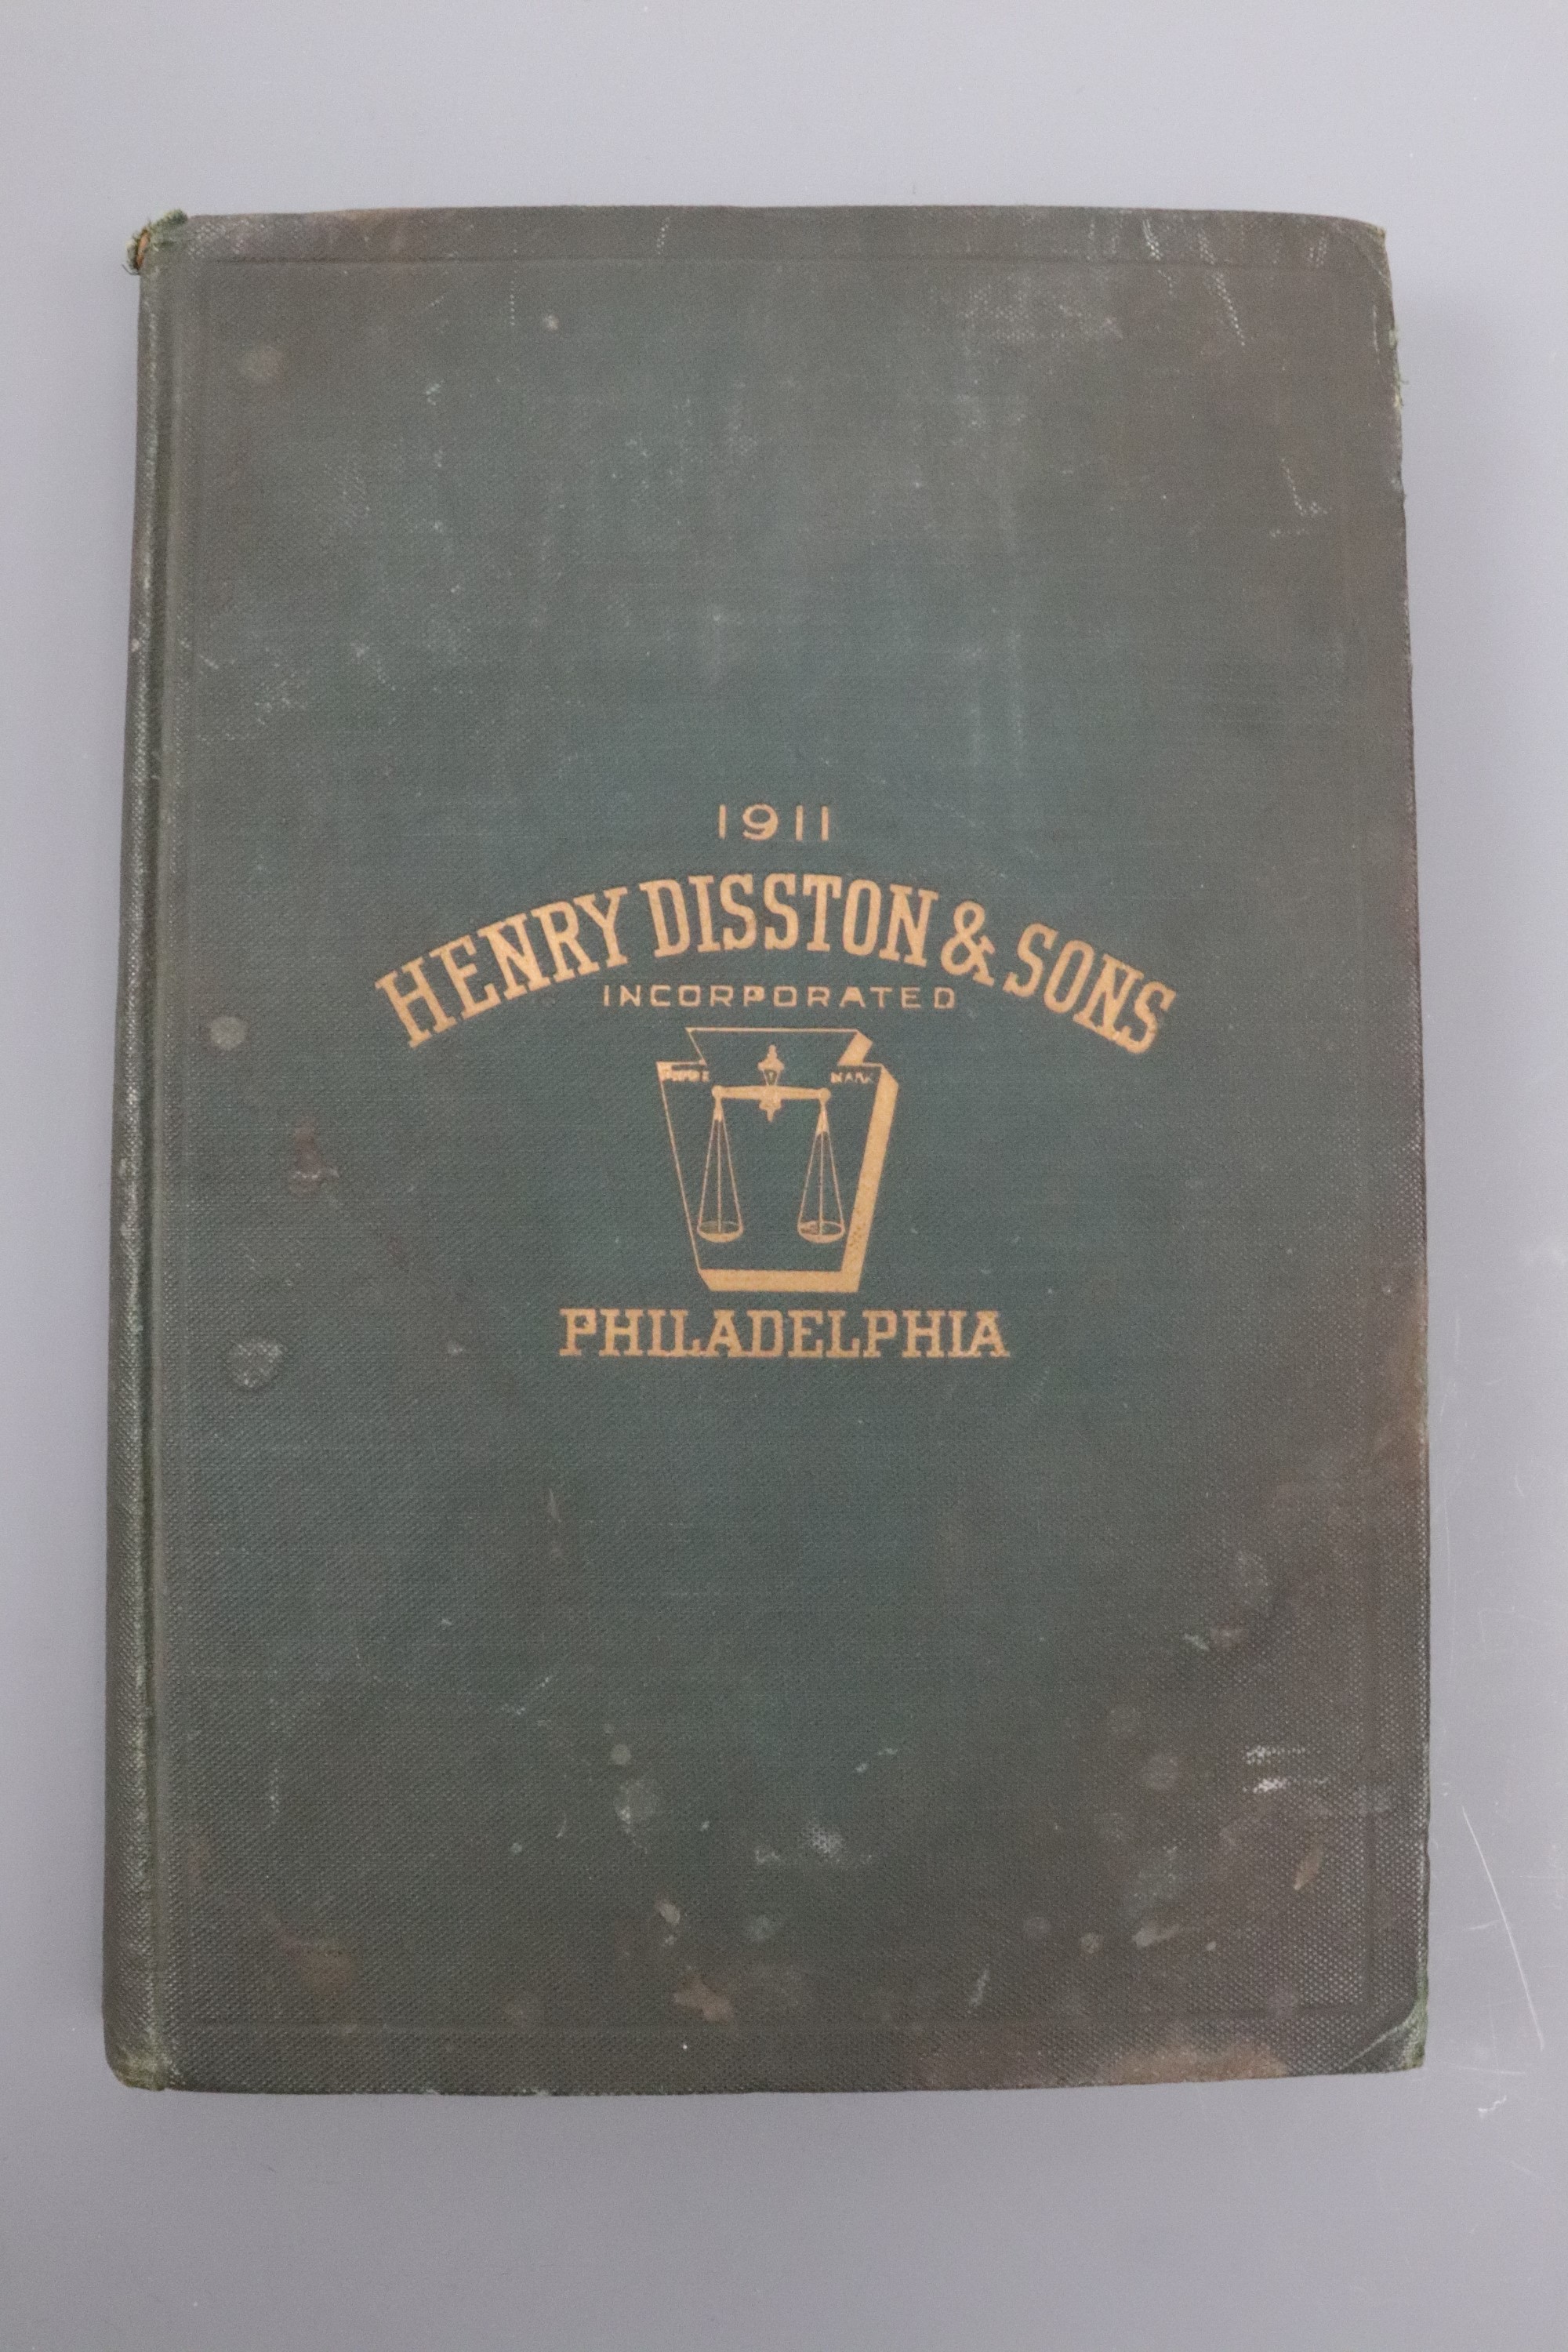 A 1911 tool catalogue of Henry Disston & Sons incorporated, Keystone Saw, Tool, Steel and File